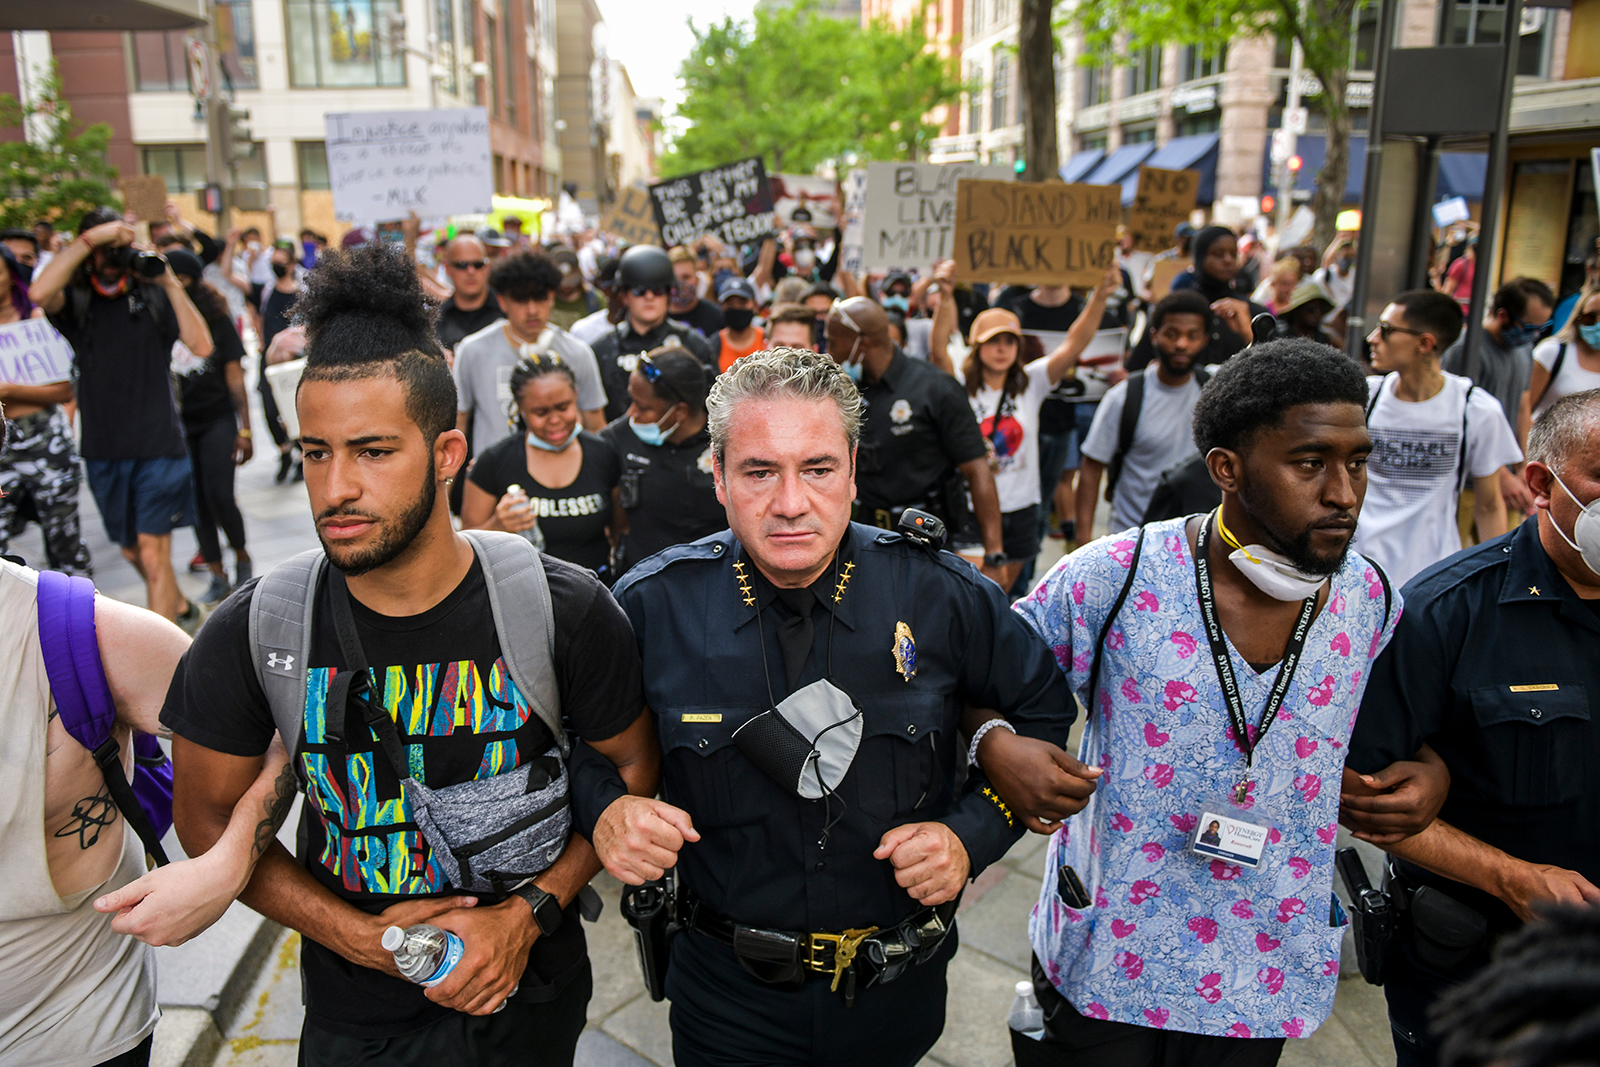 DENVER, CO - JUNE 01: Denver Police Chief Paul Pazen (C) links arms with people protesting the death of George Floyd on June 1, 2020 in Denver, Colorado. 